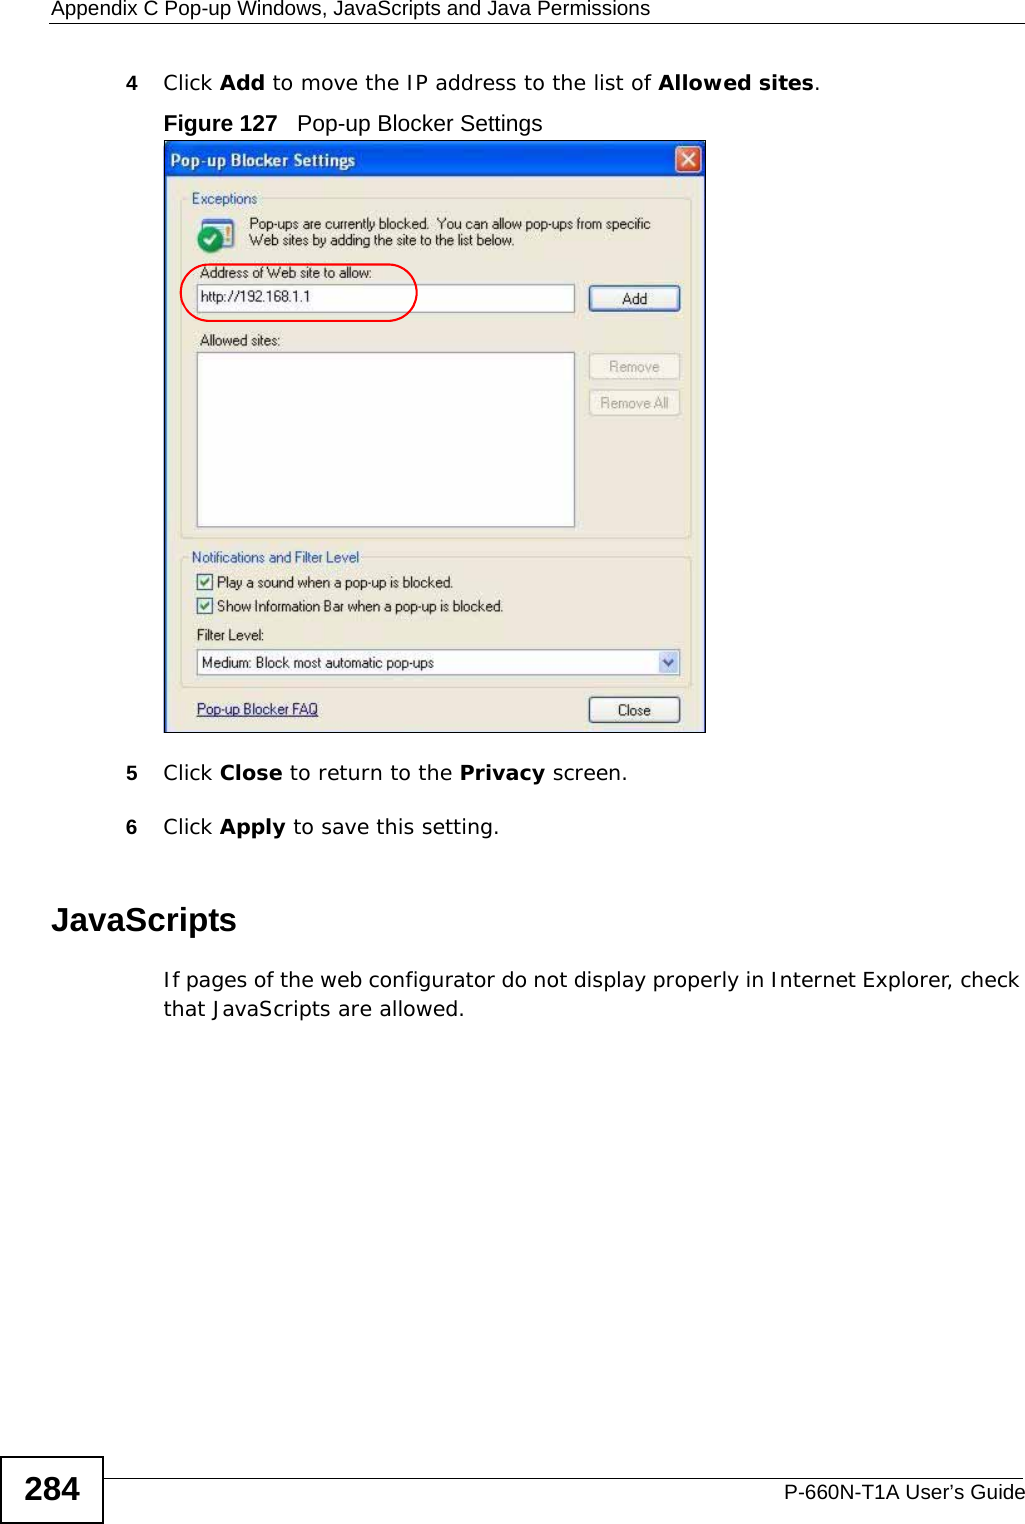 Appendix C Pop-up Windows, JavaScripts and Java PermissionsP-660N-T1A User’s Guide2844Click Add to move the IP address to the list of Allowed sites.Figure 127   Pop-up Blocker Settings5Click Close to return to the Privacy screen. 6Click Apply to save this setting. JavaScriptsIf pages of the web configurator do not display properly in Internet Explorer, check that JavaScripts are allowed. 